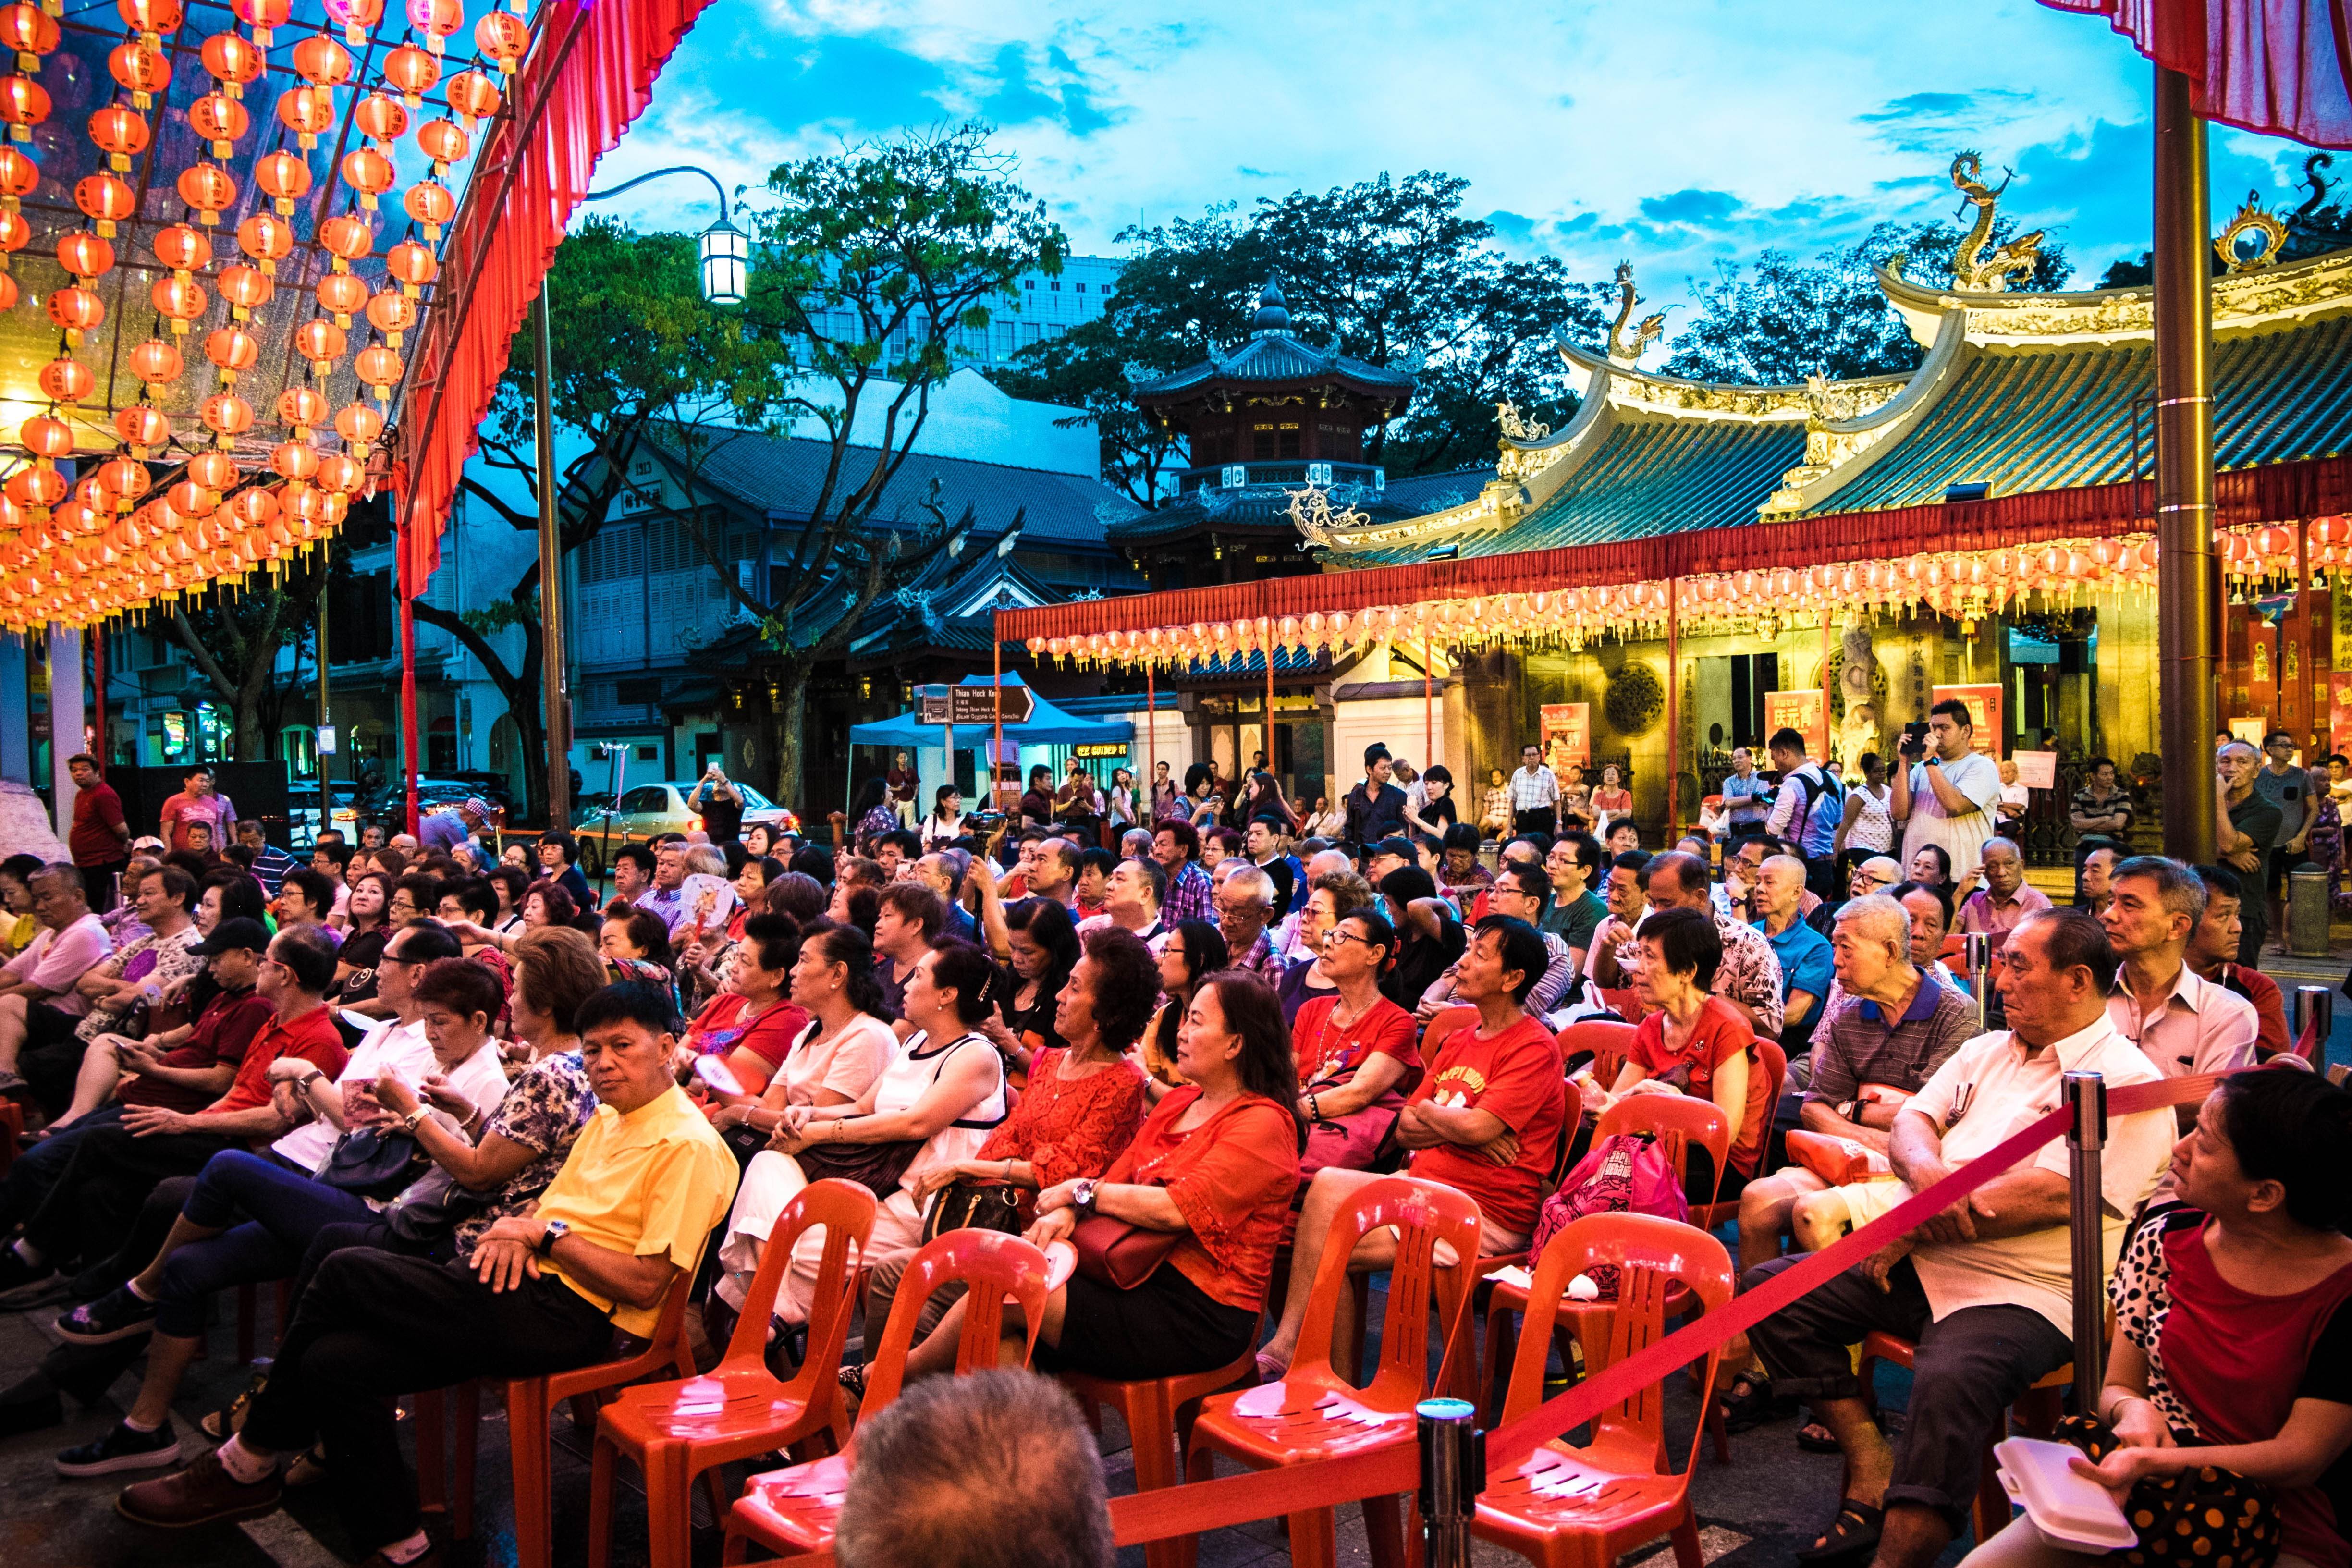 Getai (歌台) translates literally from Chinese as “song stage” and is a form of vernacular entertainment involving live performances of music, song, and dance